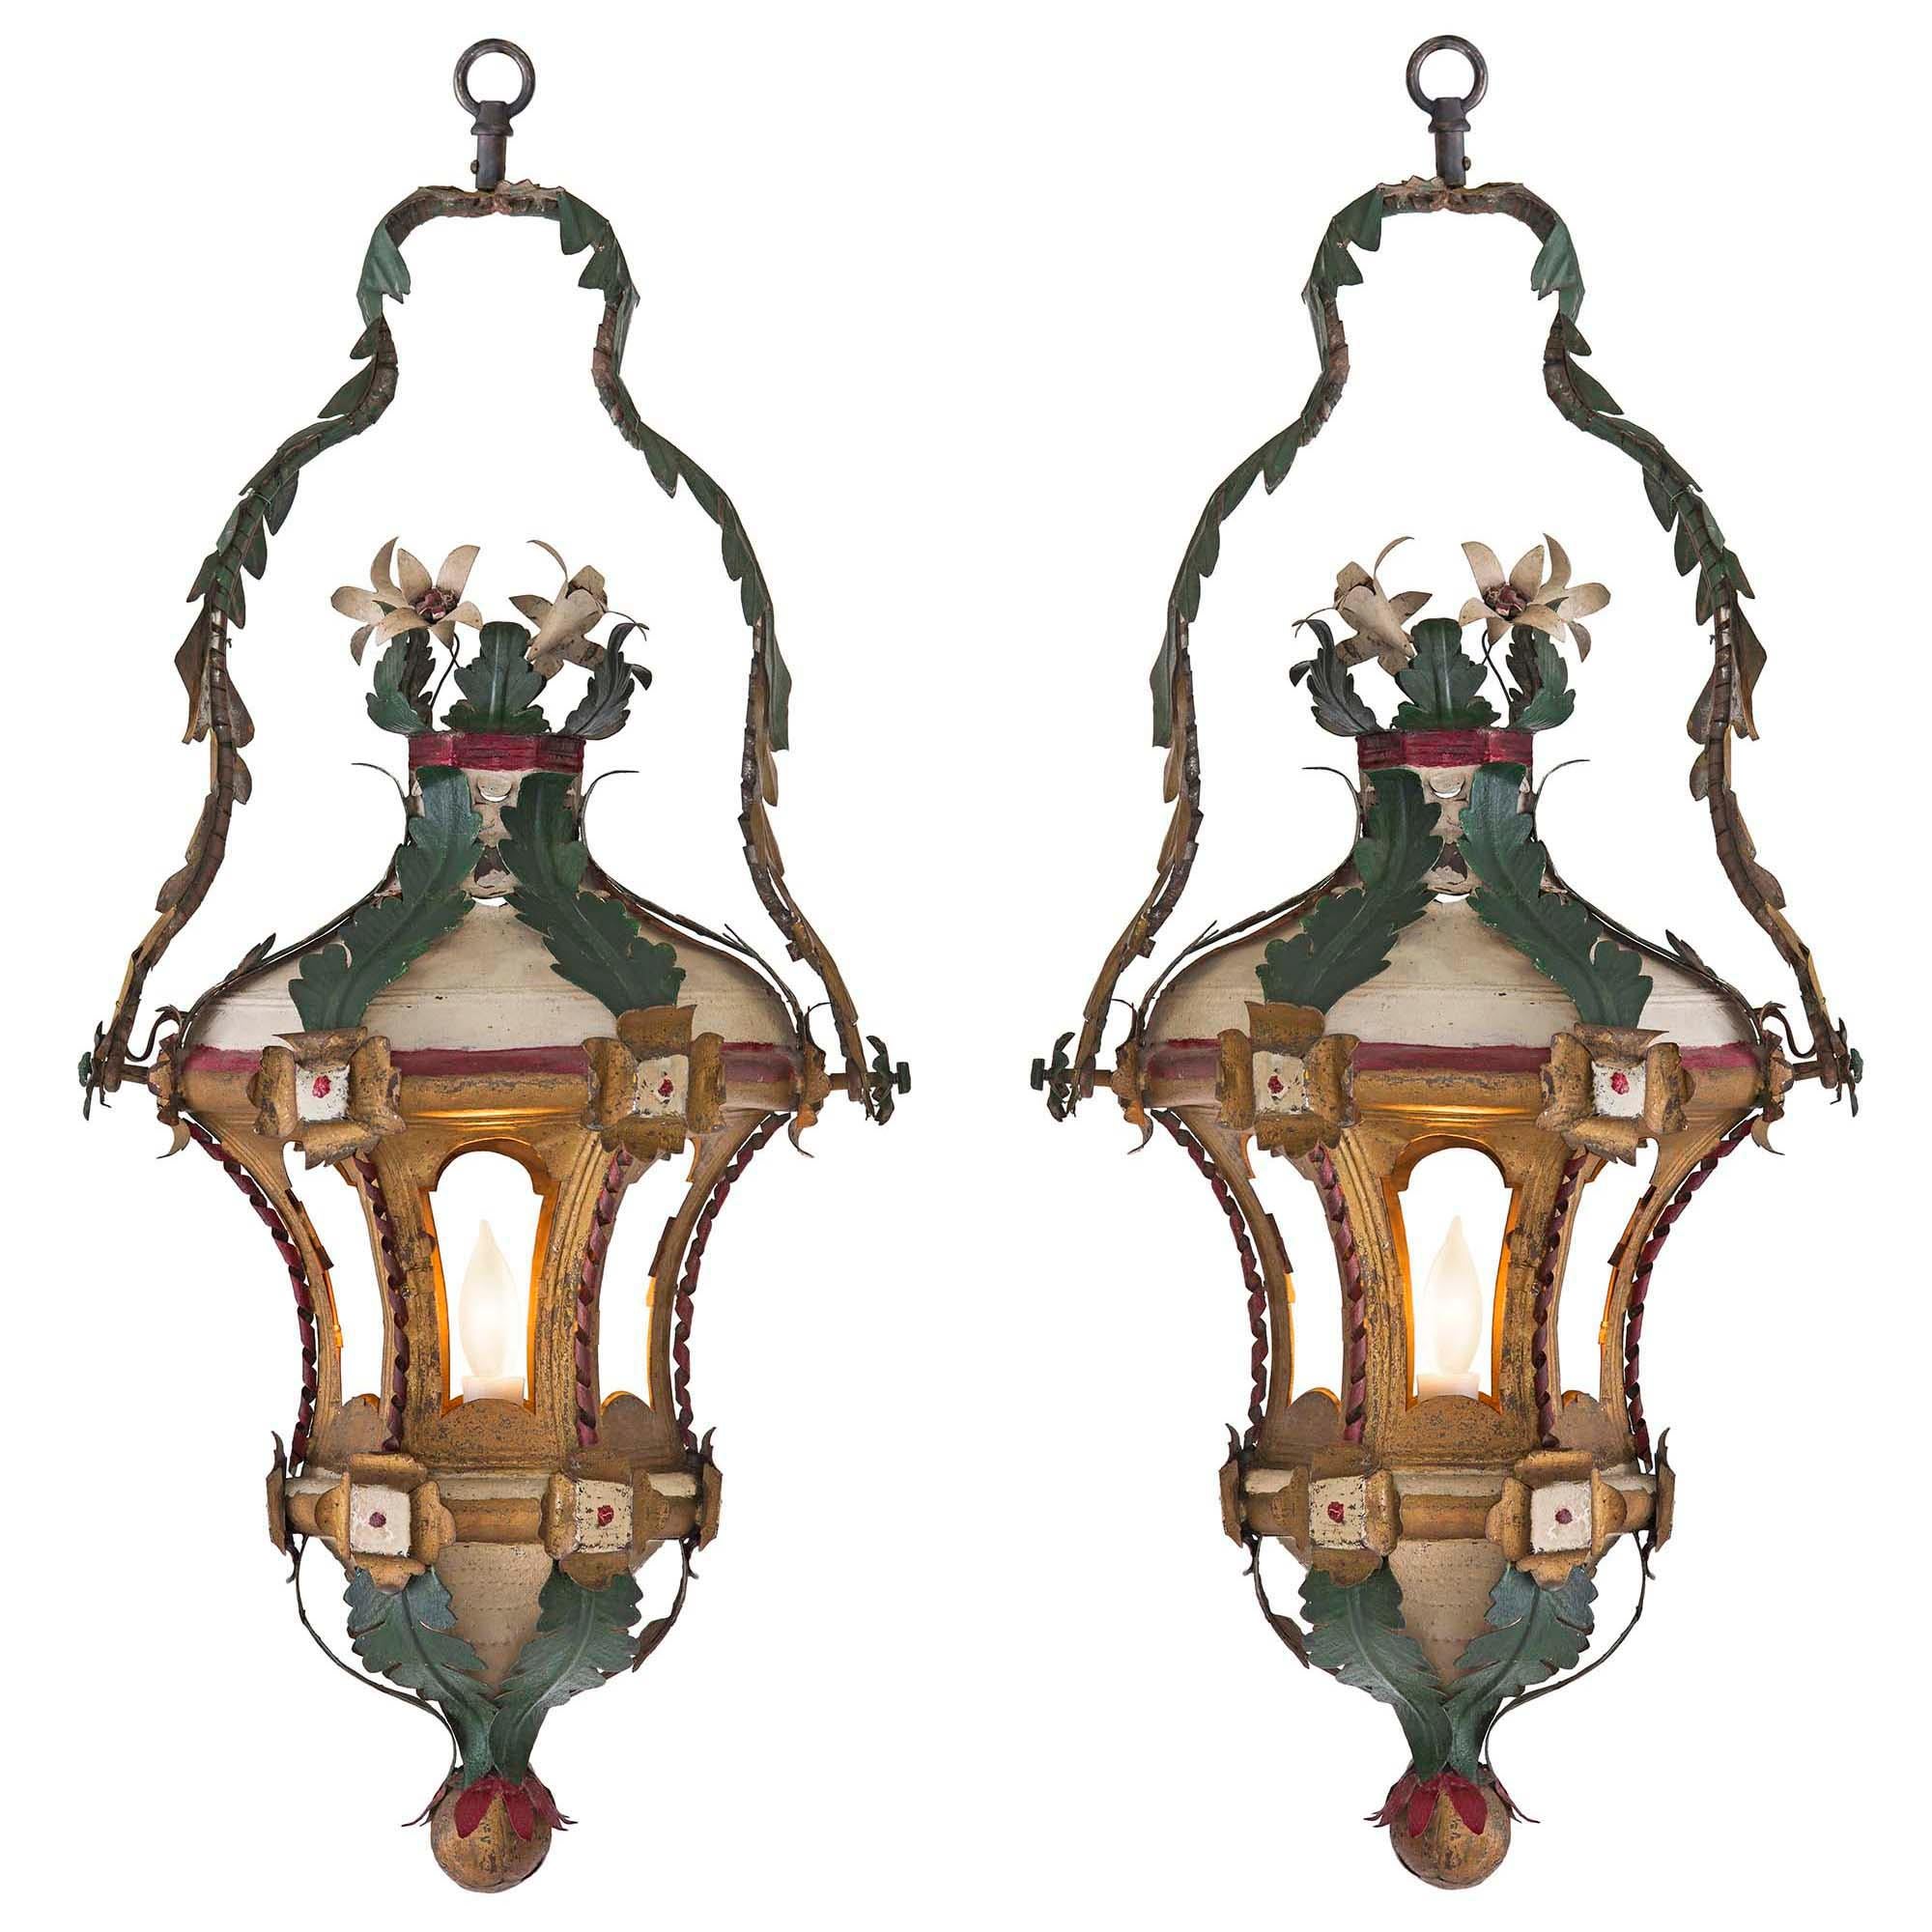 A very decorative pair of 18th century Venetian painted and gilt tole lanterns. The pair with a bottom gilt ball leads to 'S' scrolled green leaves with red tips. The hexagonally shaped band above has reserves at each corner. The six concaved open